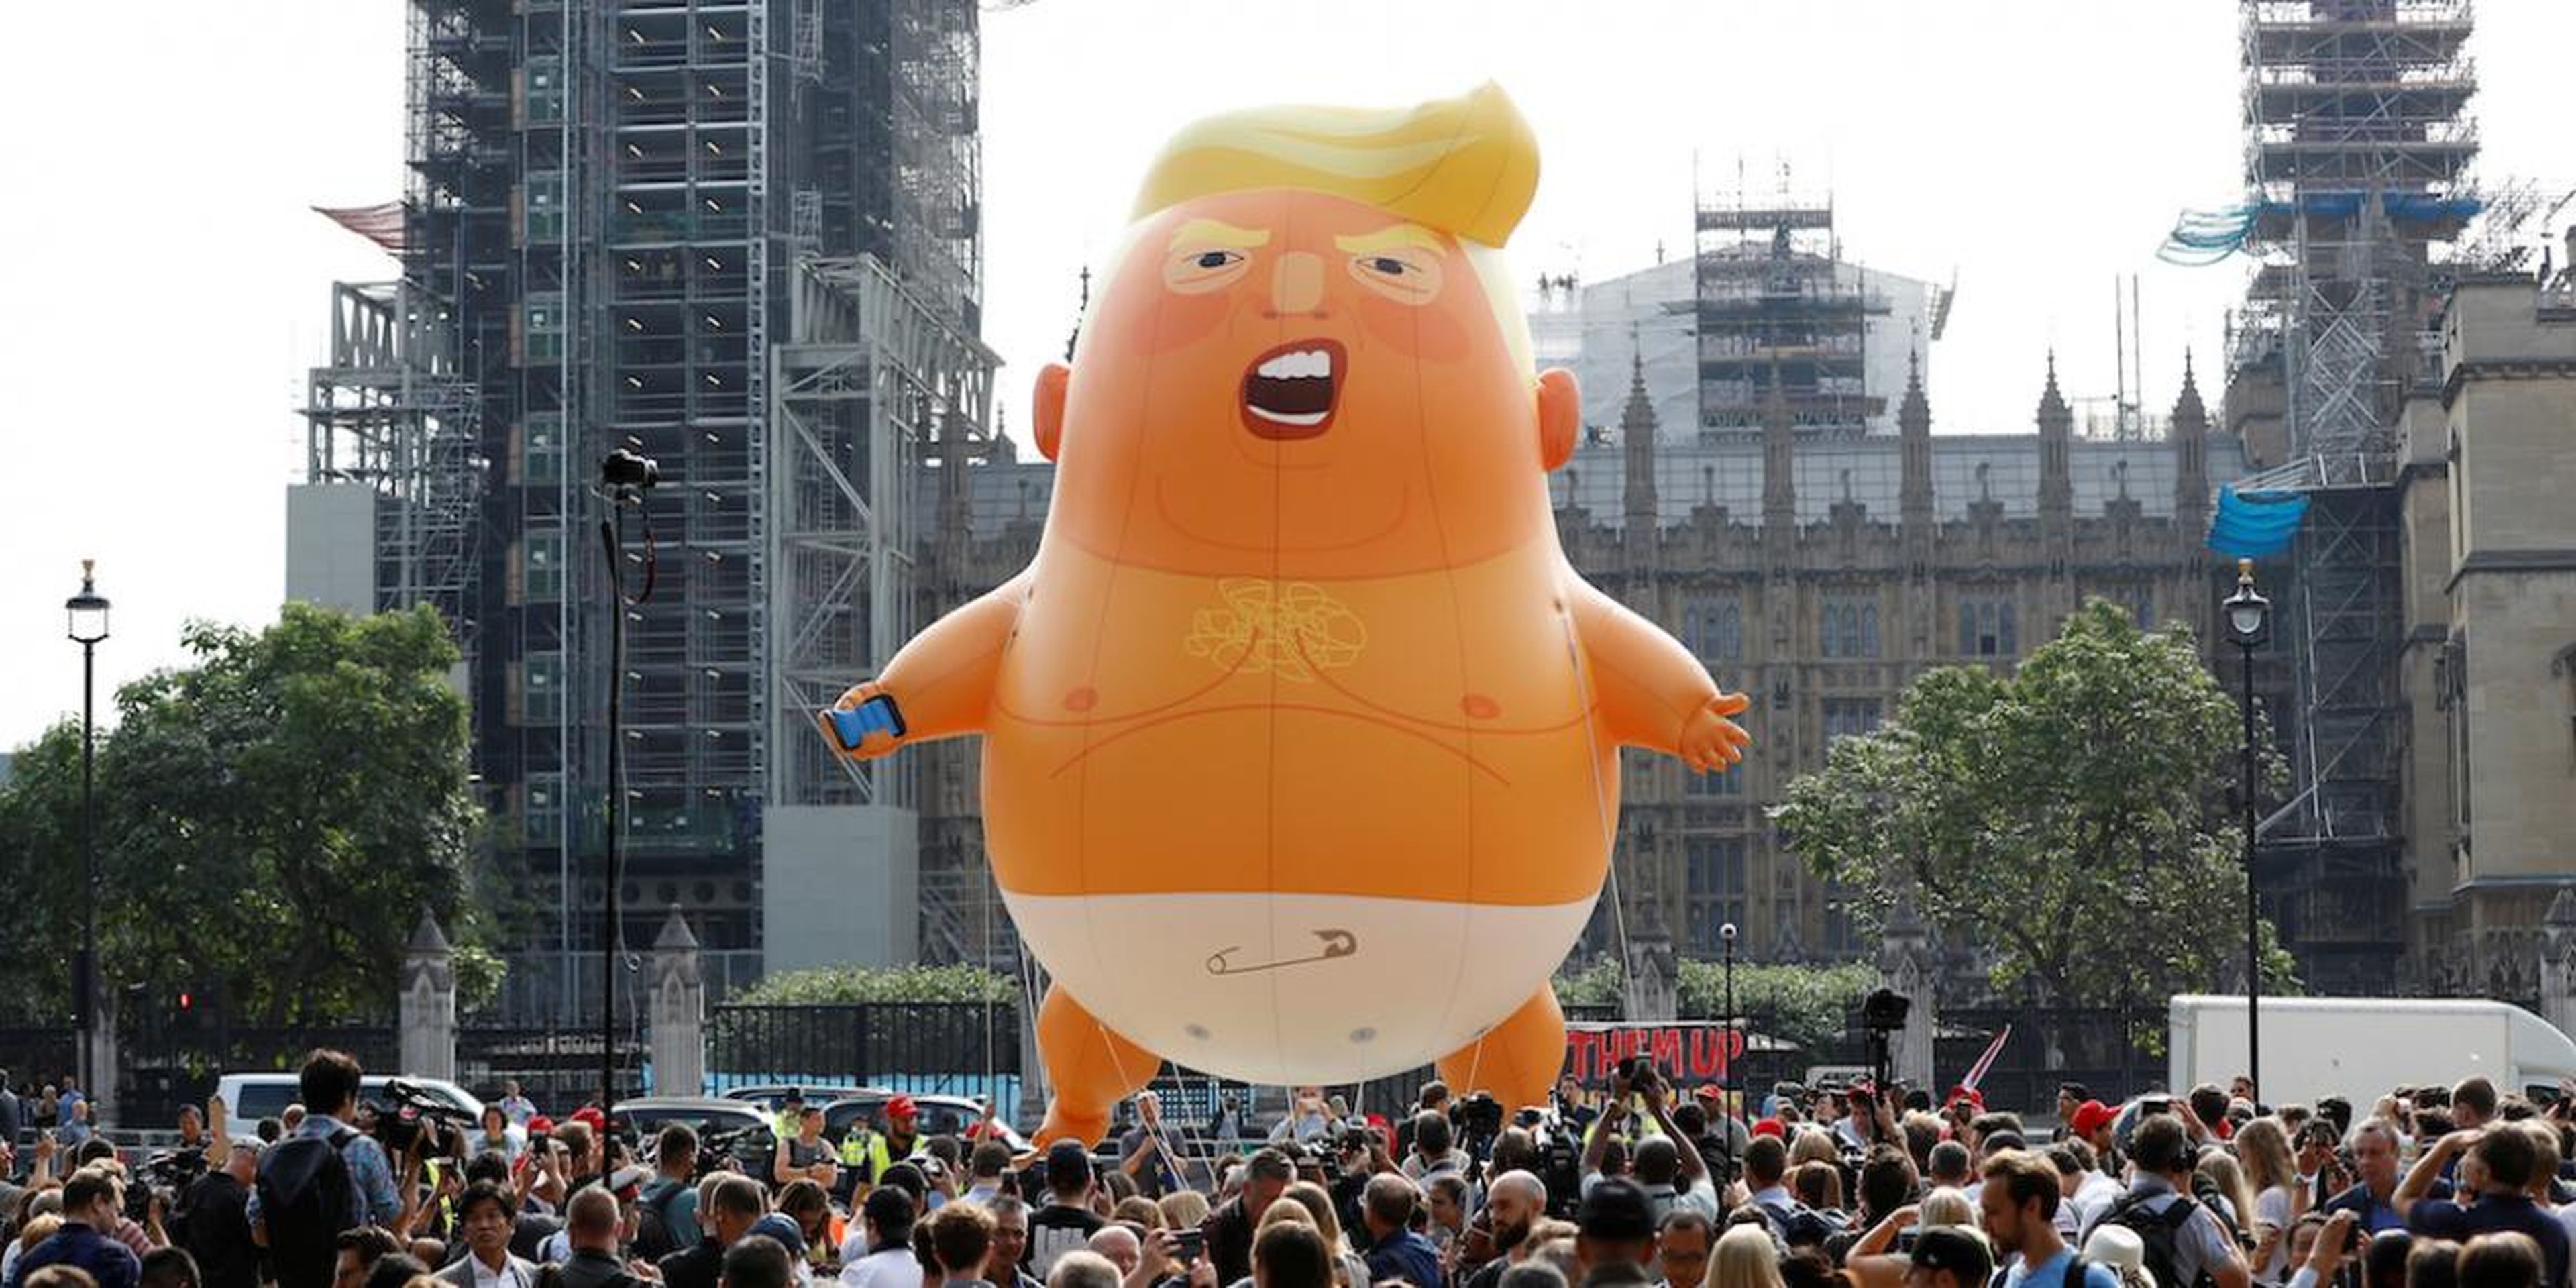 The Trump baby blimp, in London in July 2018.